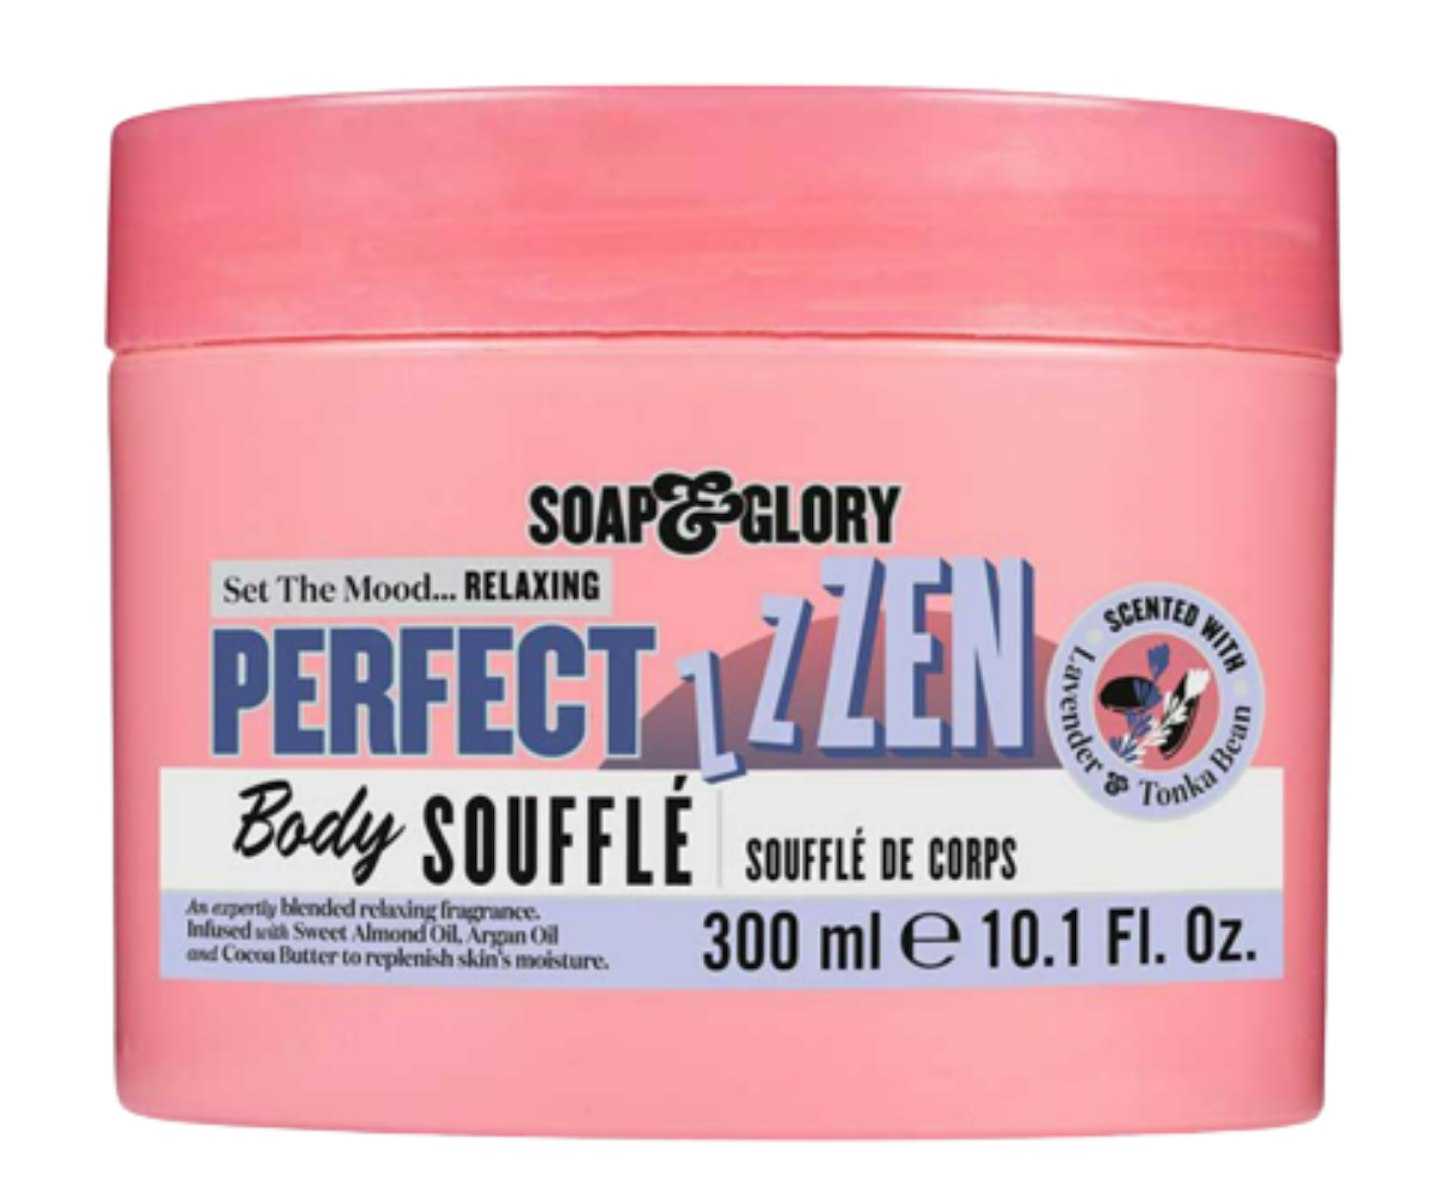 A picture of the Soap & Glory Perfect Zen Body Souffle